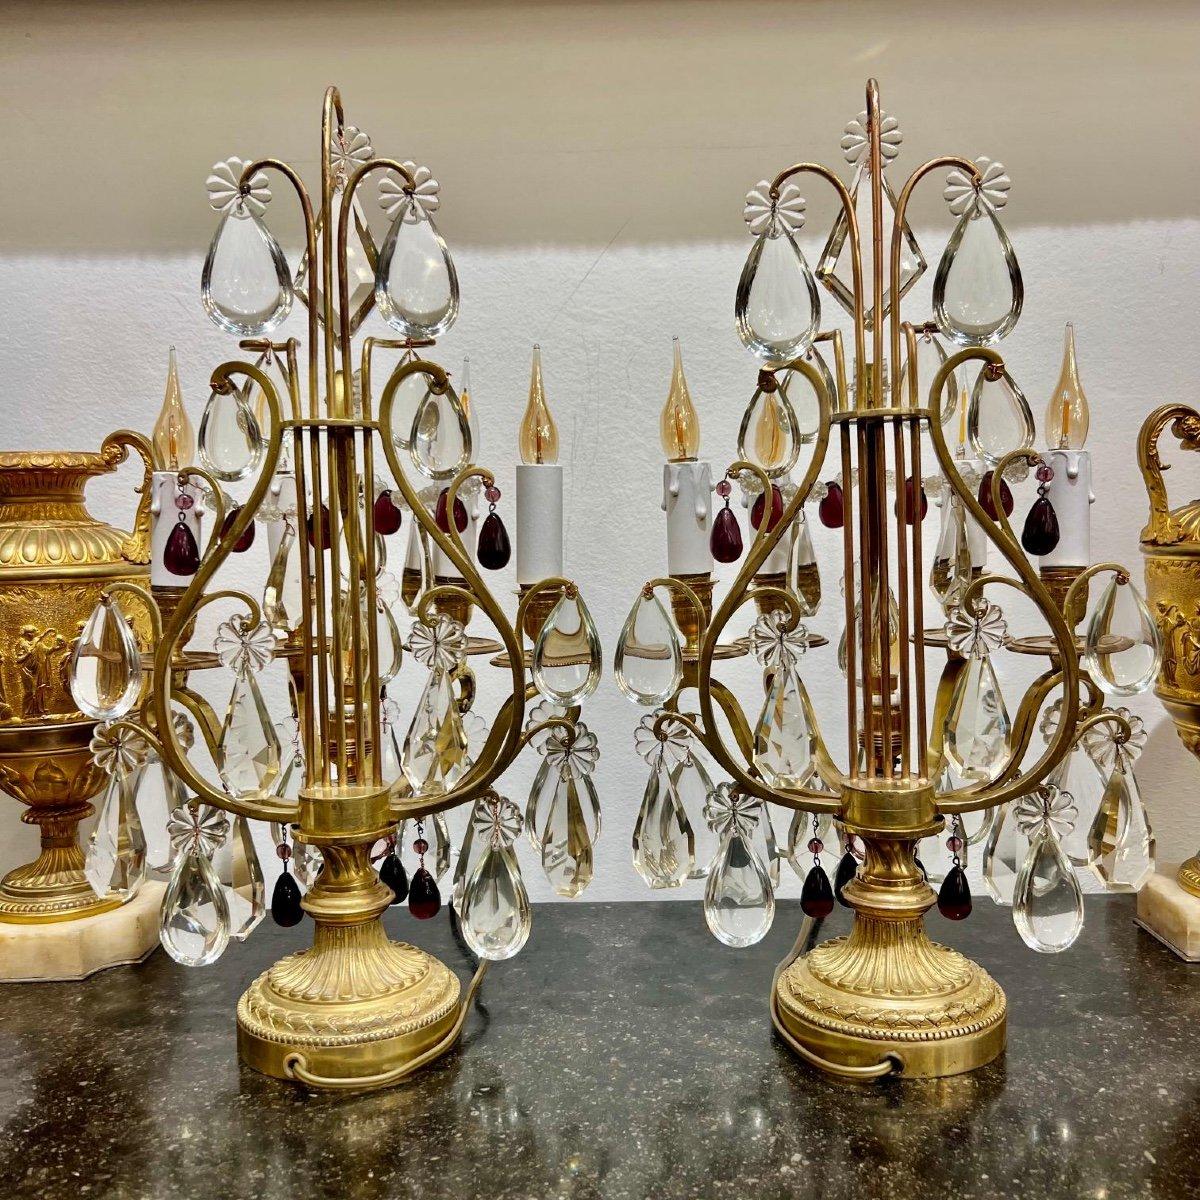 This stunning pair of candelabras is made of gilded bronze and crystal, consisting of four lights each. The gilded bronze structure is designed in the shape of a lyre, adding a touch of classical sophistication to any space. They are adorned with